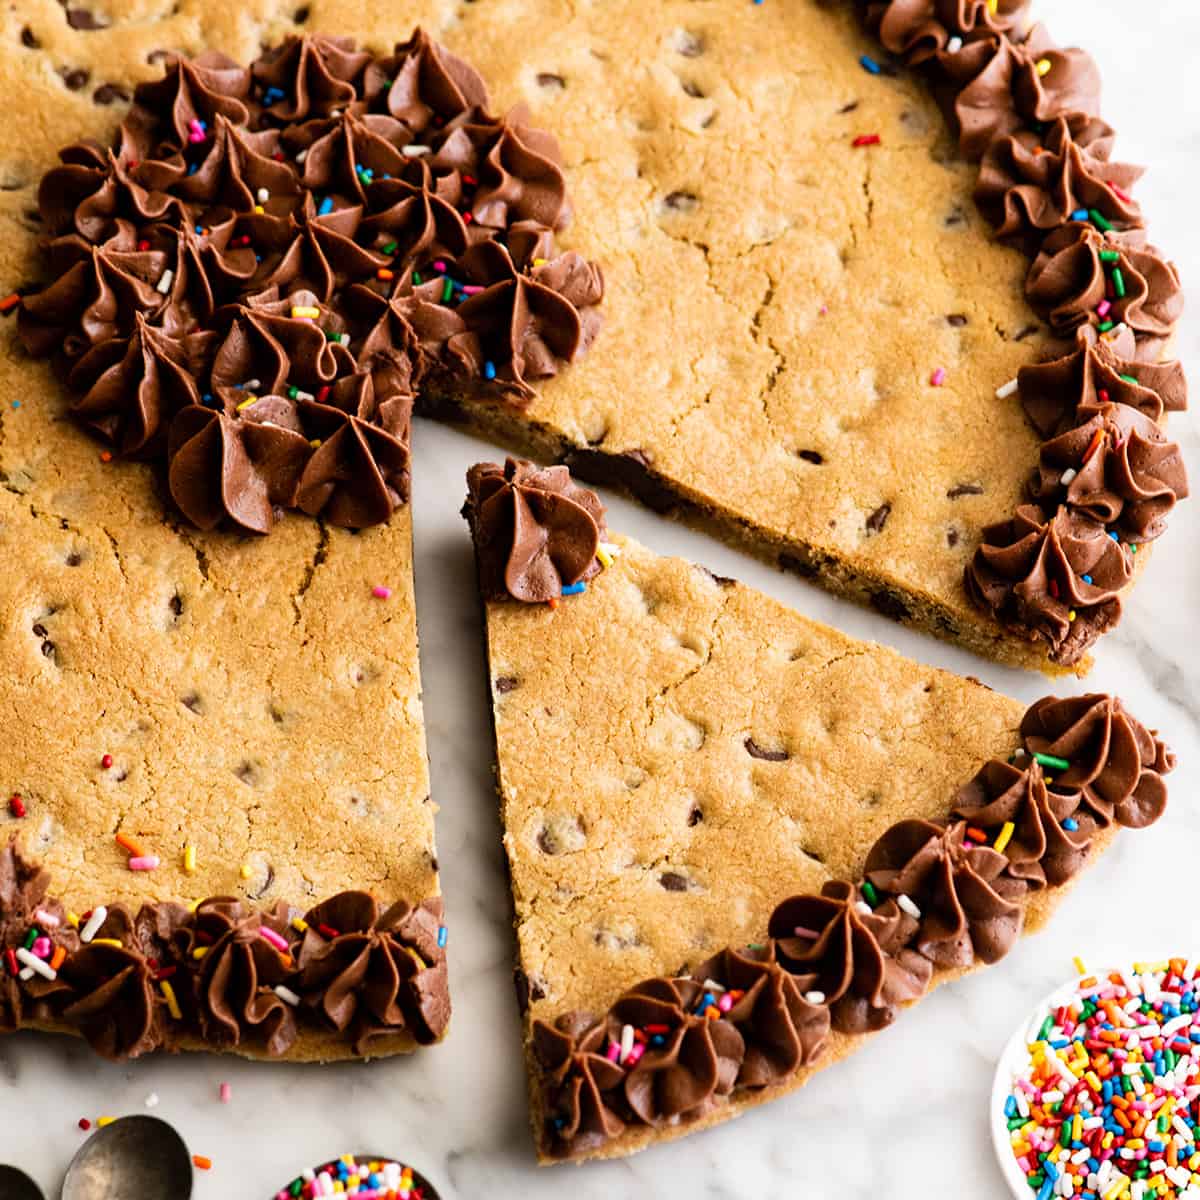 a chocolate chip cookie cake with chocolate frosting & sprinkles and one piece cut out of it